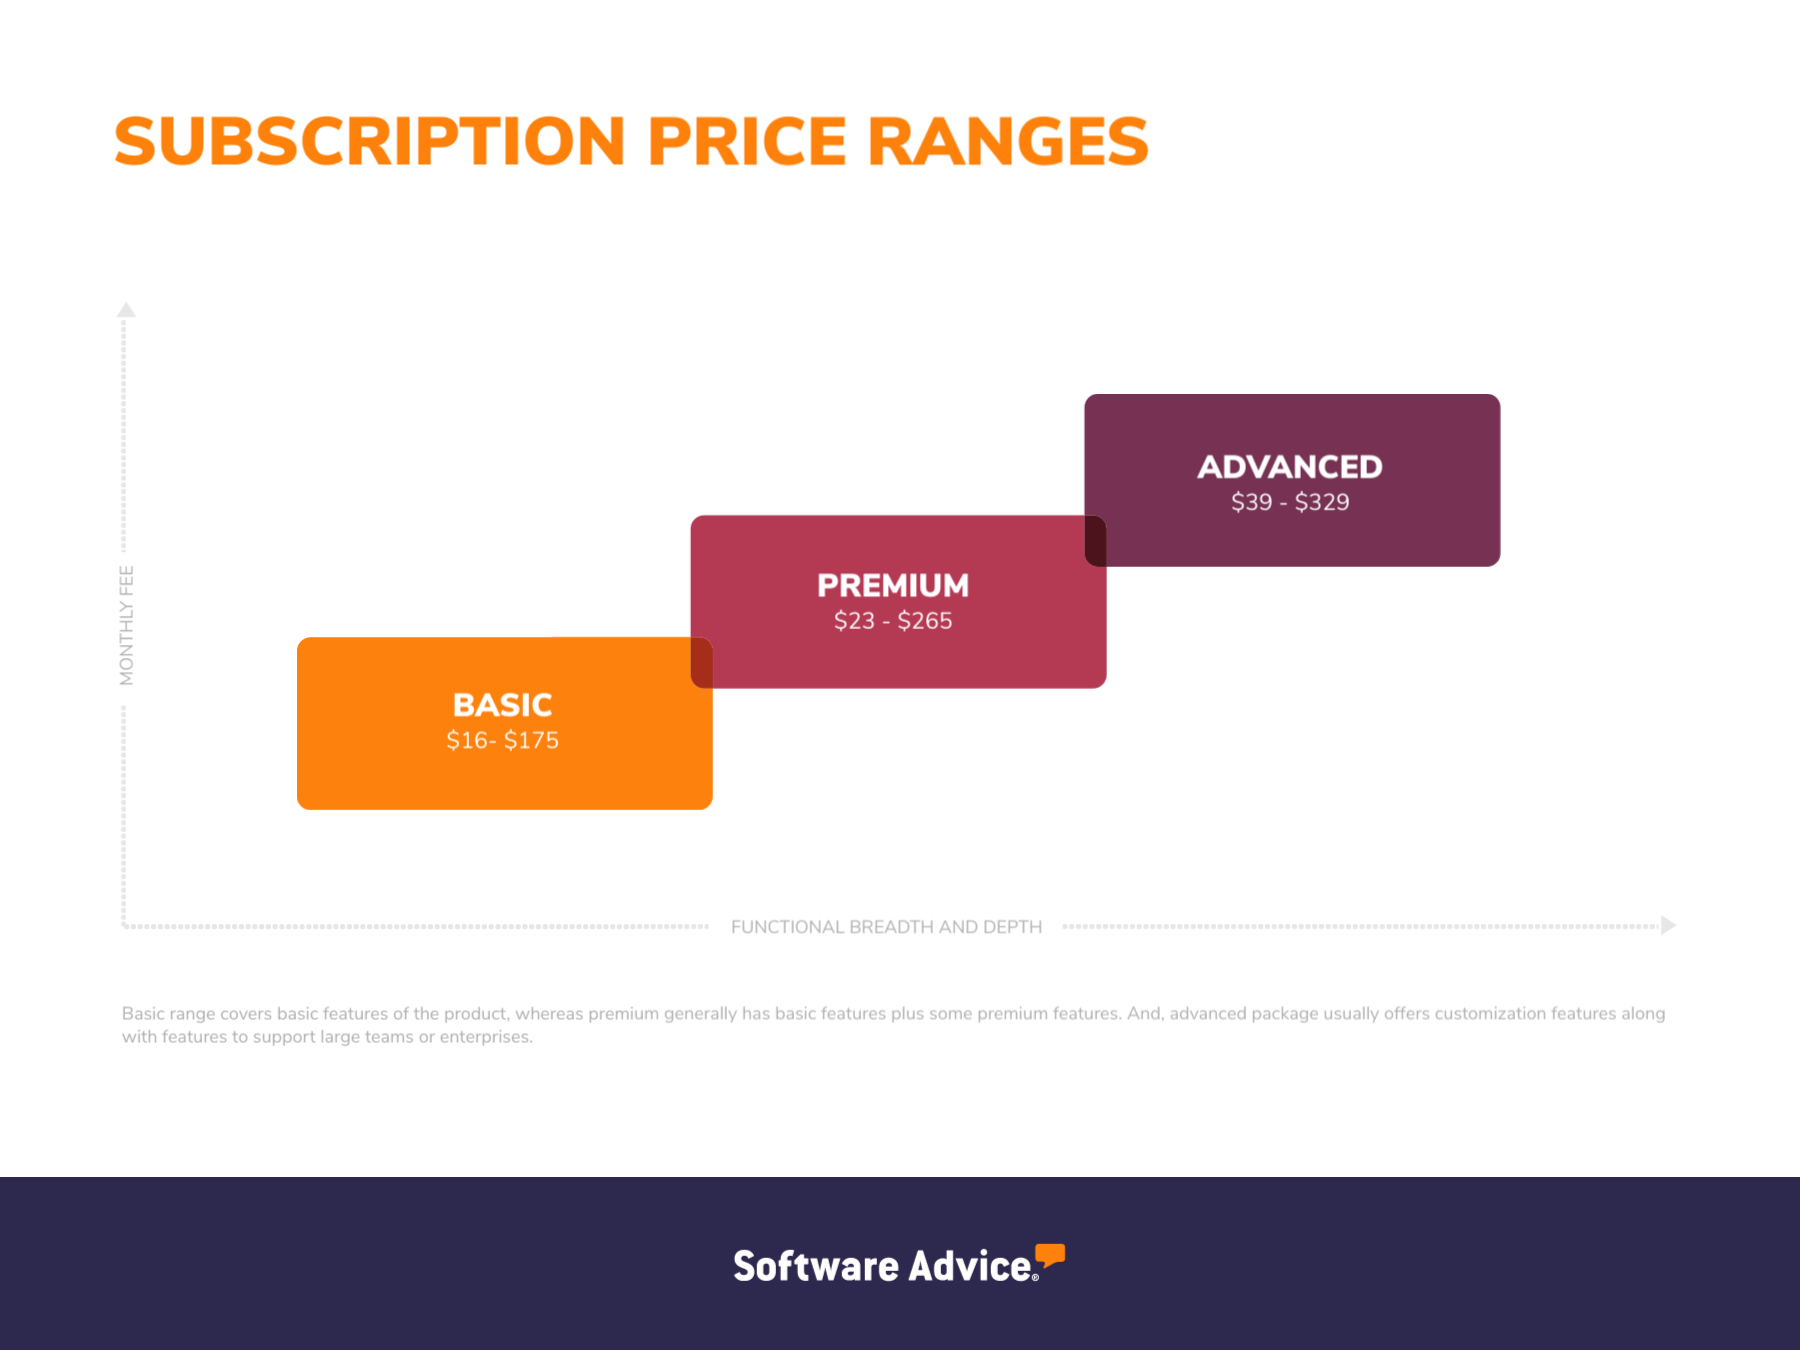 Infographic showing subscription price ranges for call center software